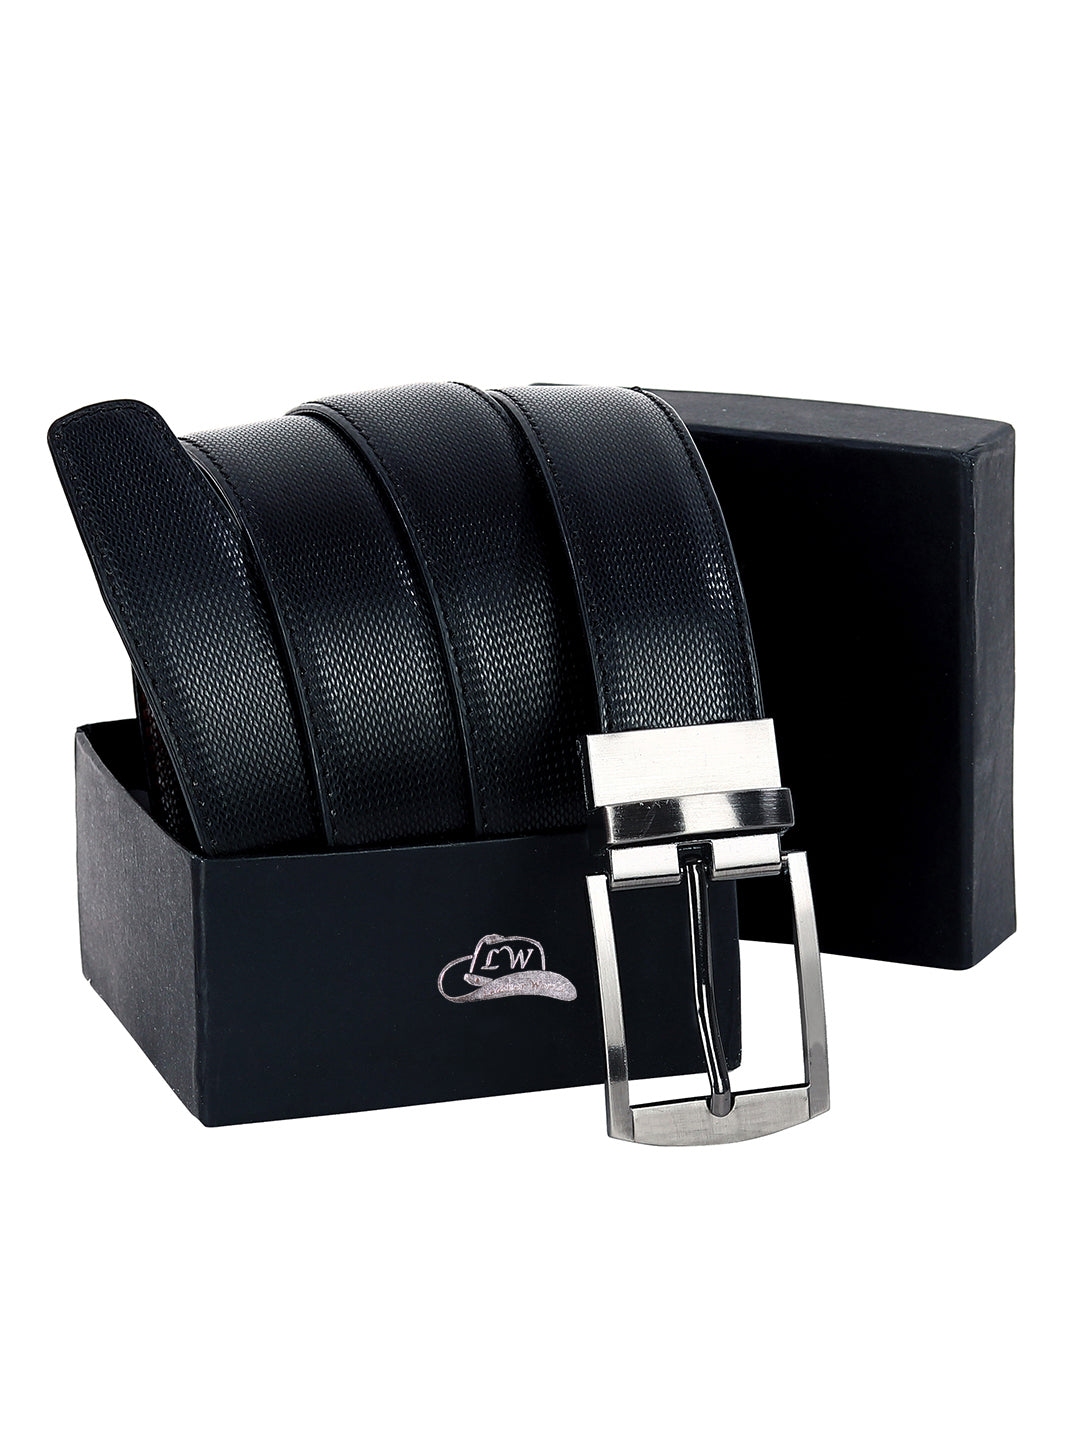 Leather World Reversible Pin Buckle Vegan Leather Formal Black/Brown Belt For Men with Double Sided Strap